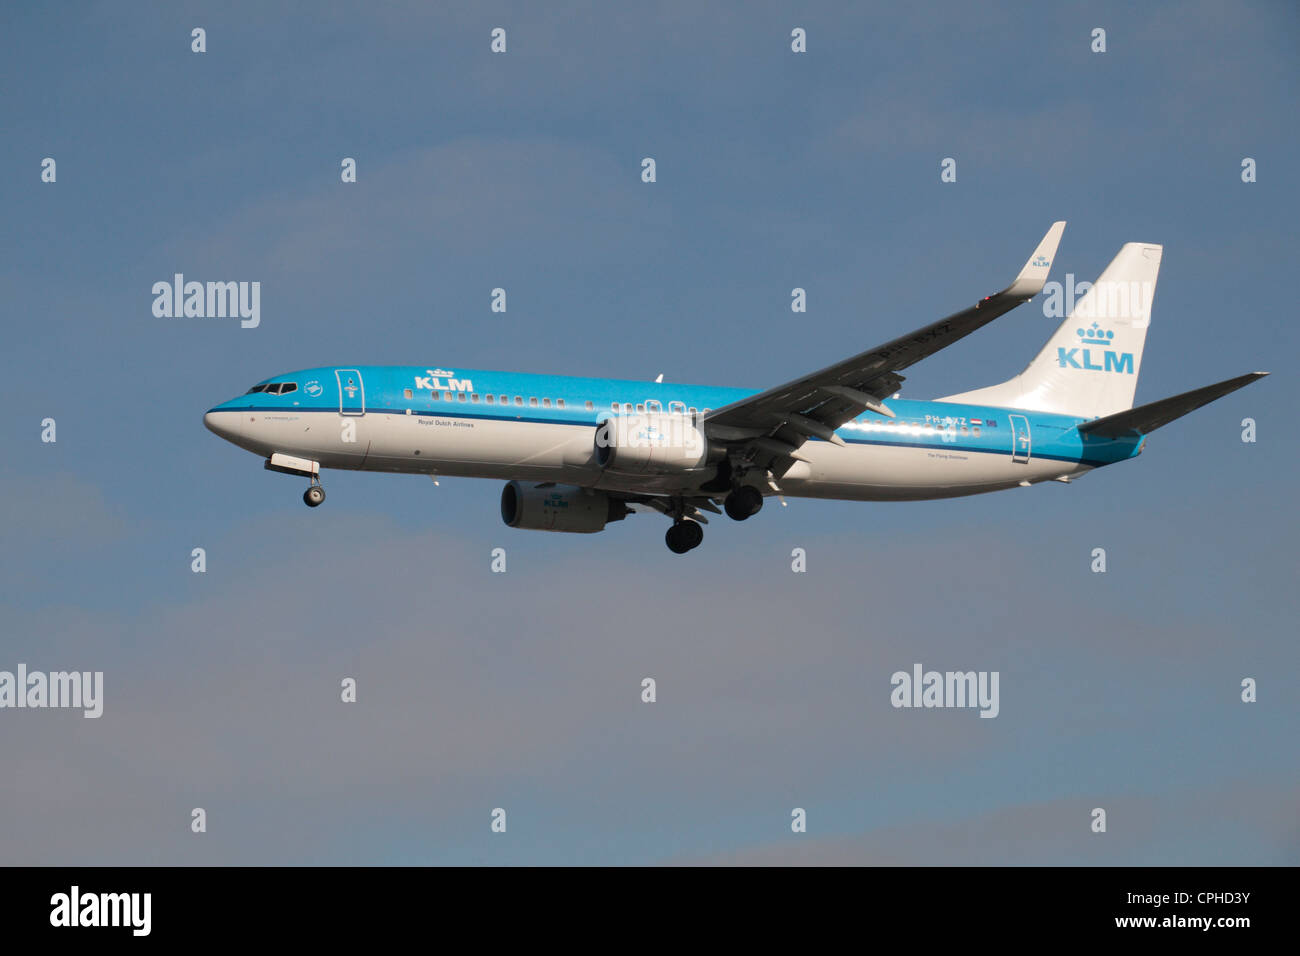 KLM Royal Dutch Airlines Boeing 737-8K2(WL) (PH-BXZ') about to land at Heathrow Airport, London, UK. Stock Photo